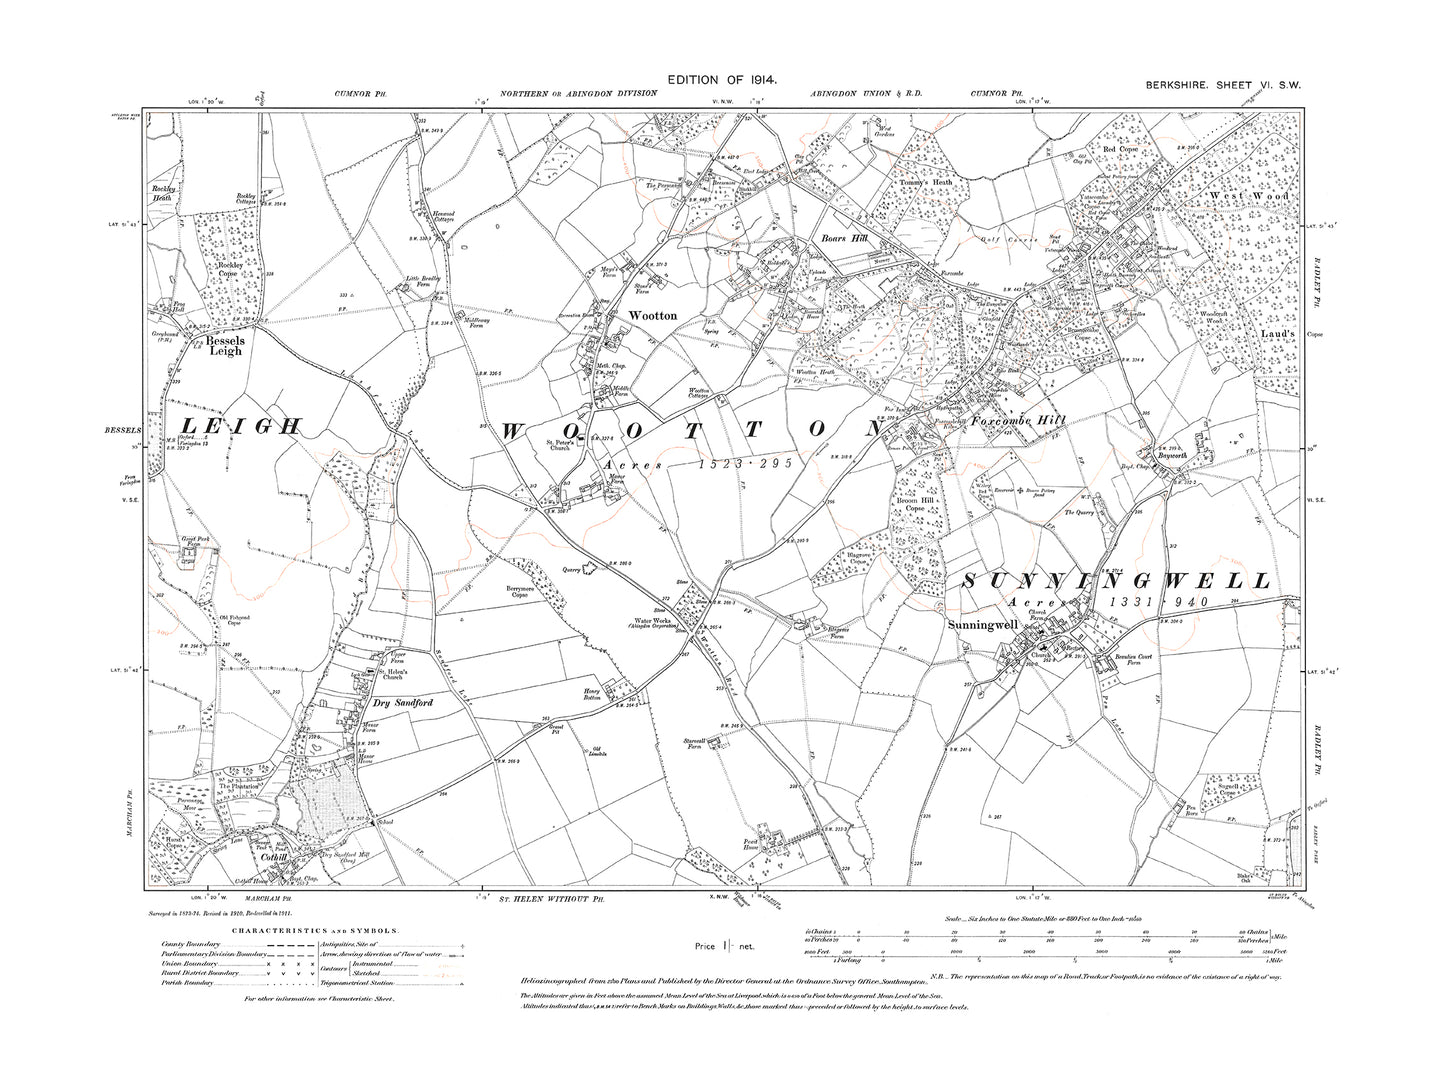 A 1914 map showing Sunningwell, Wootton, Foxcombe Hill, Dry Sandford in Berkshire - OS 1:10560 scale map, Berks 6SW